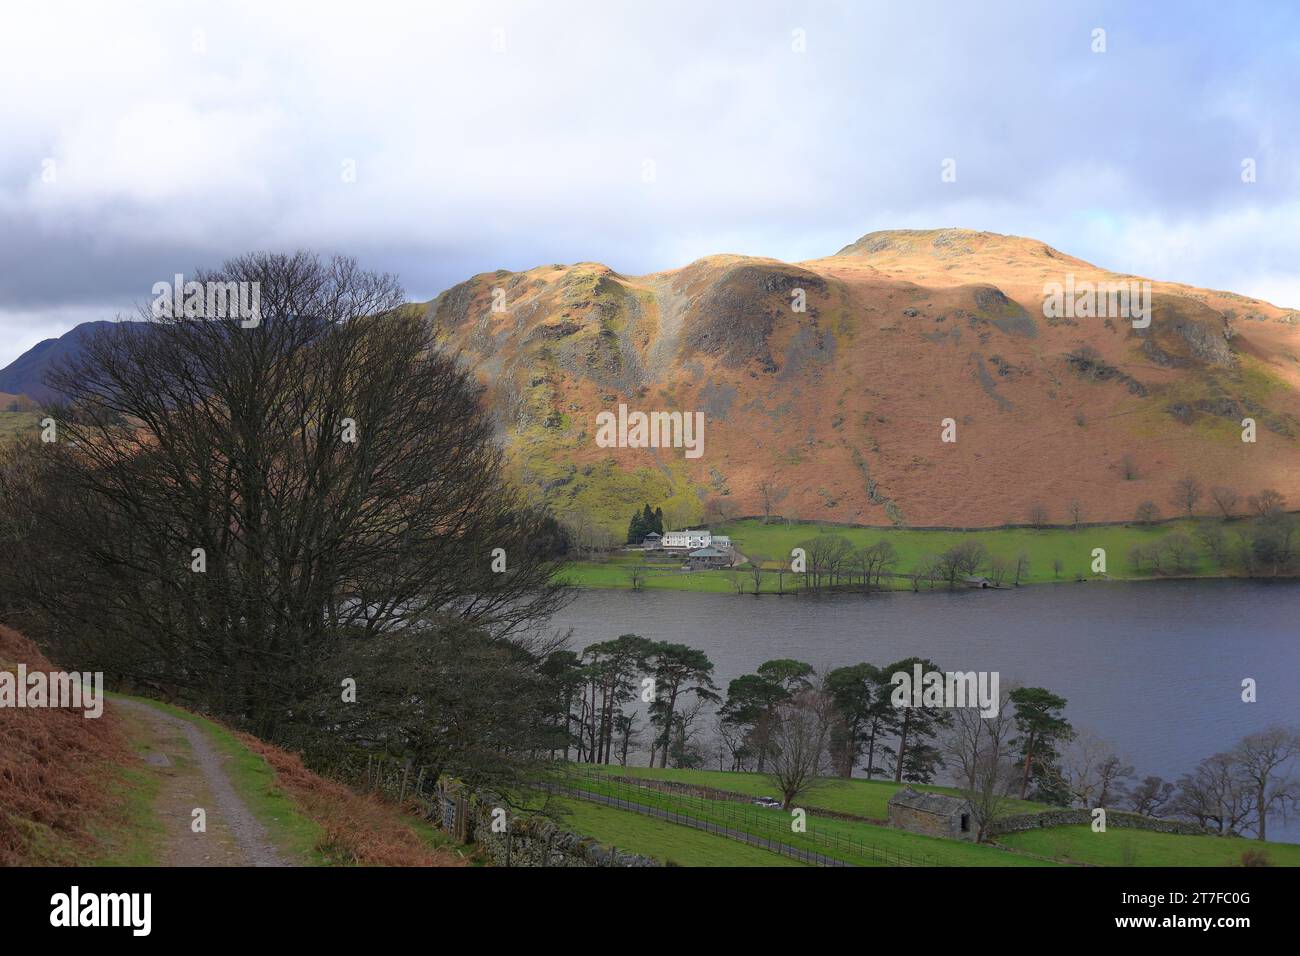 Landscape images at Ullswater in the Lake District Stock Photo